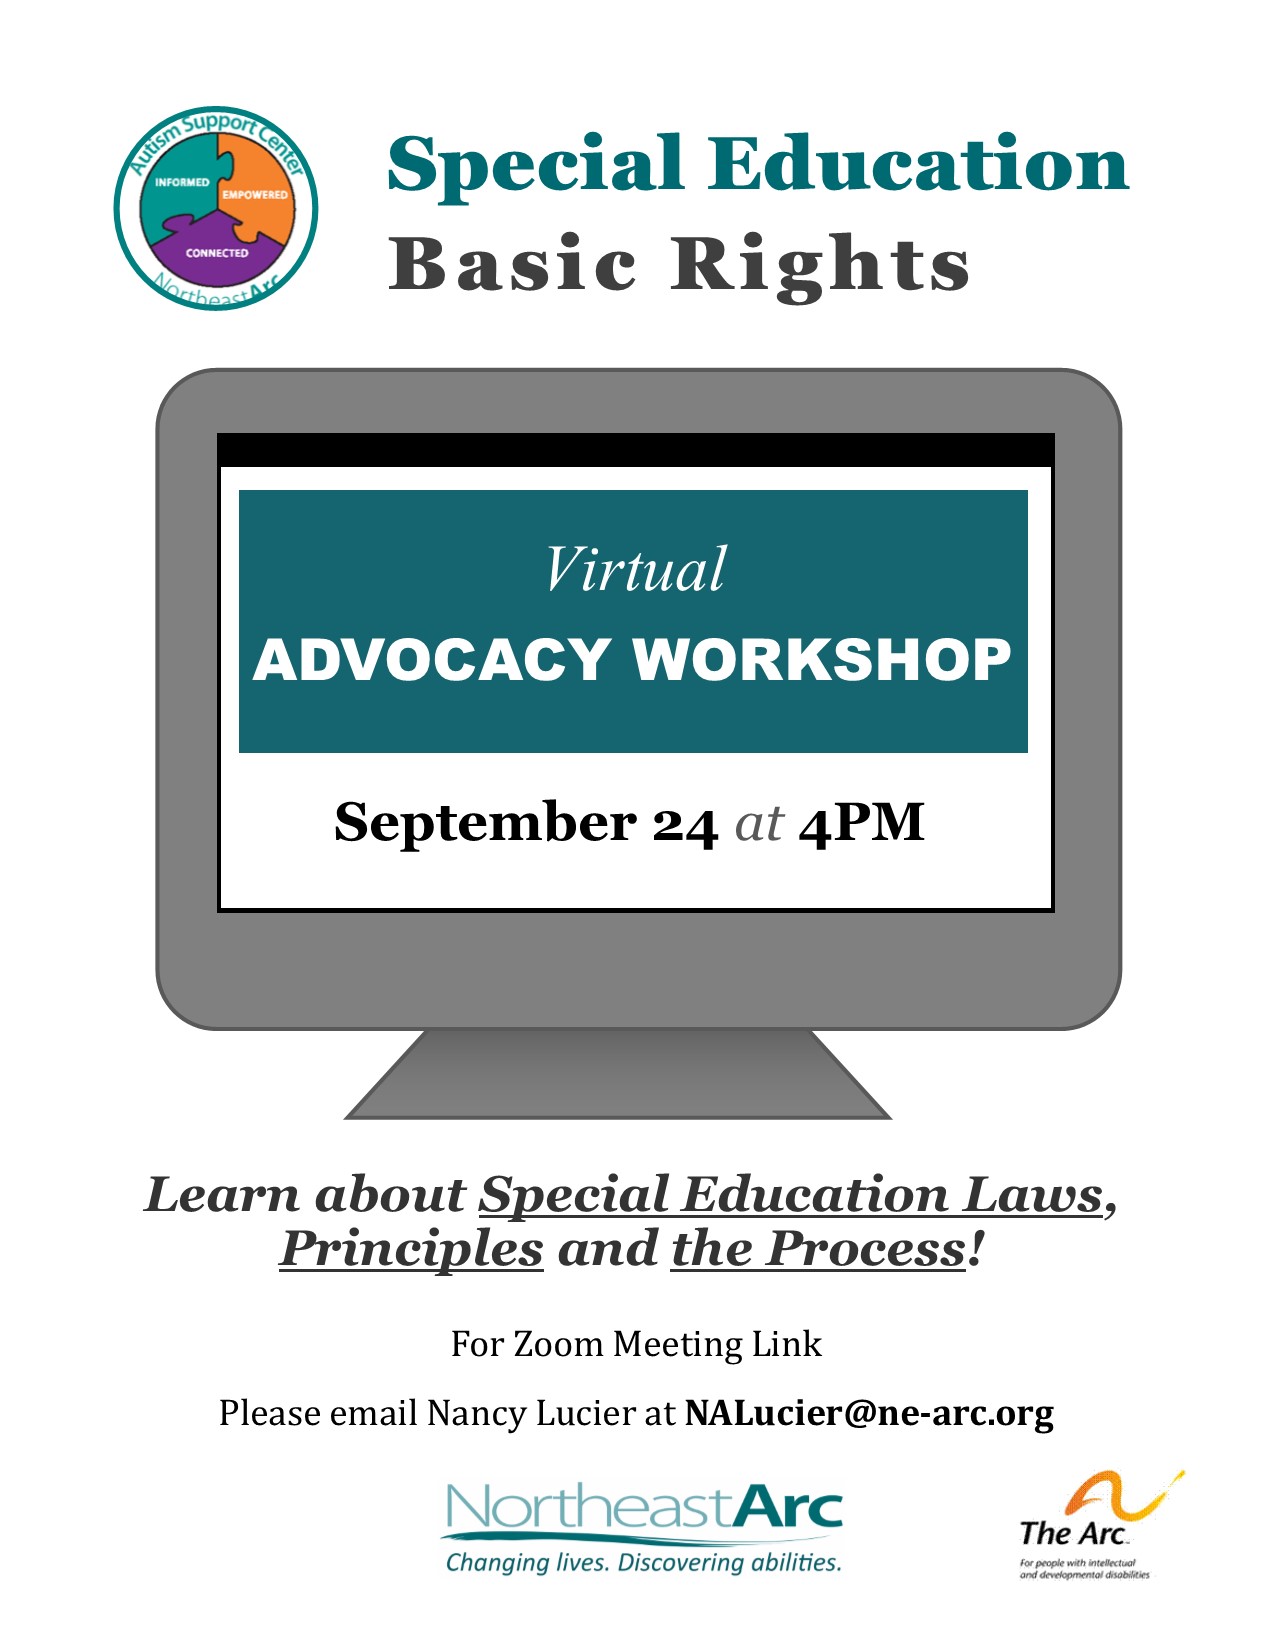 Flyer for Special Education Basic Rights Workshop